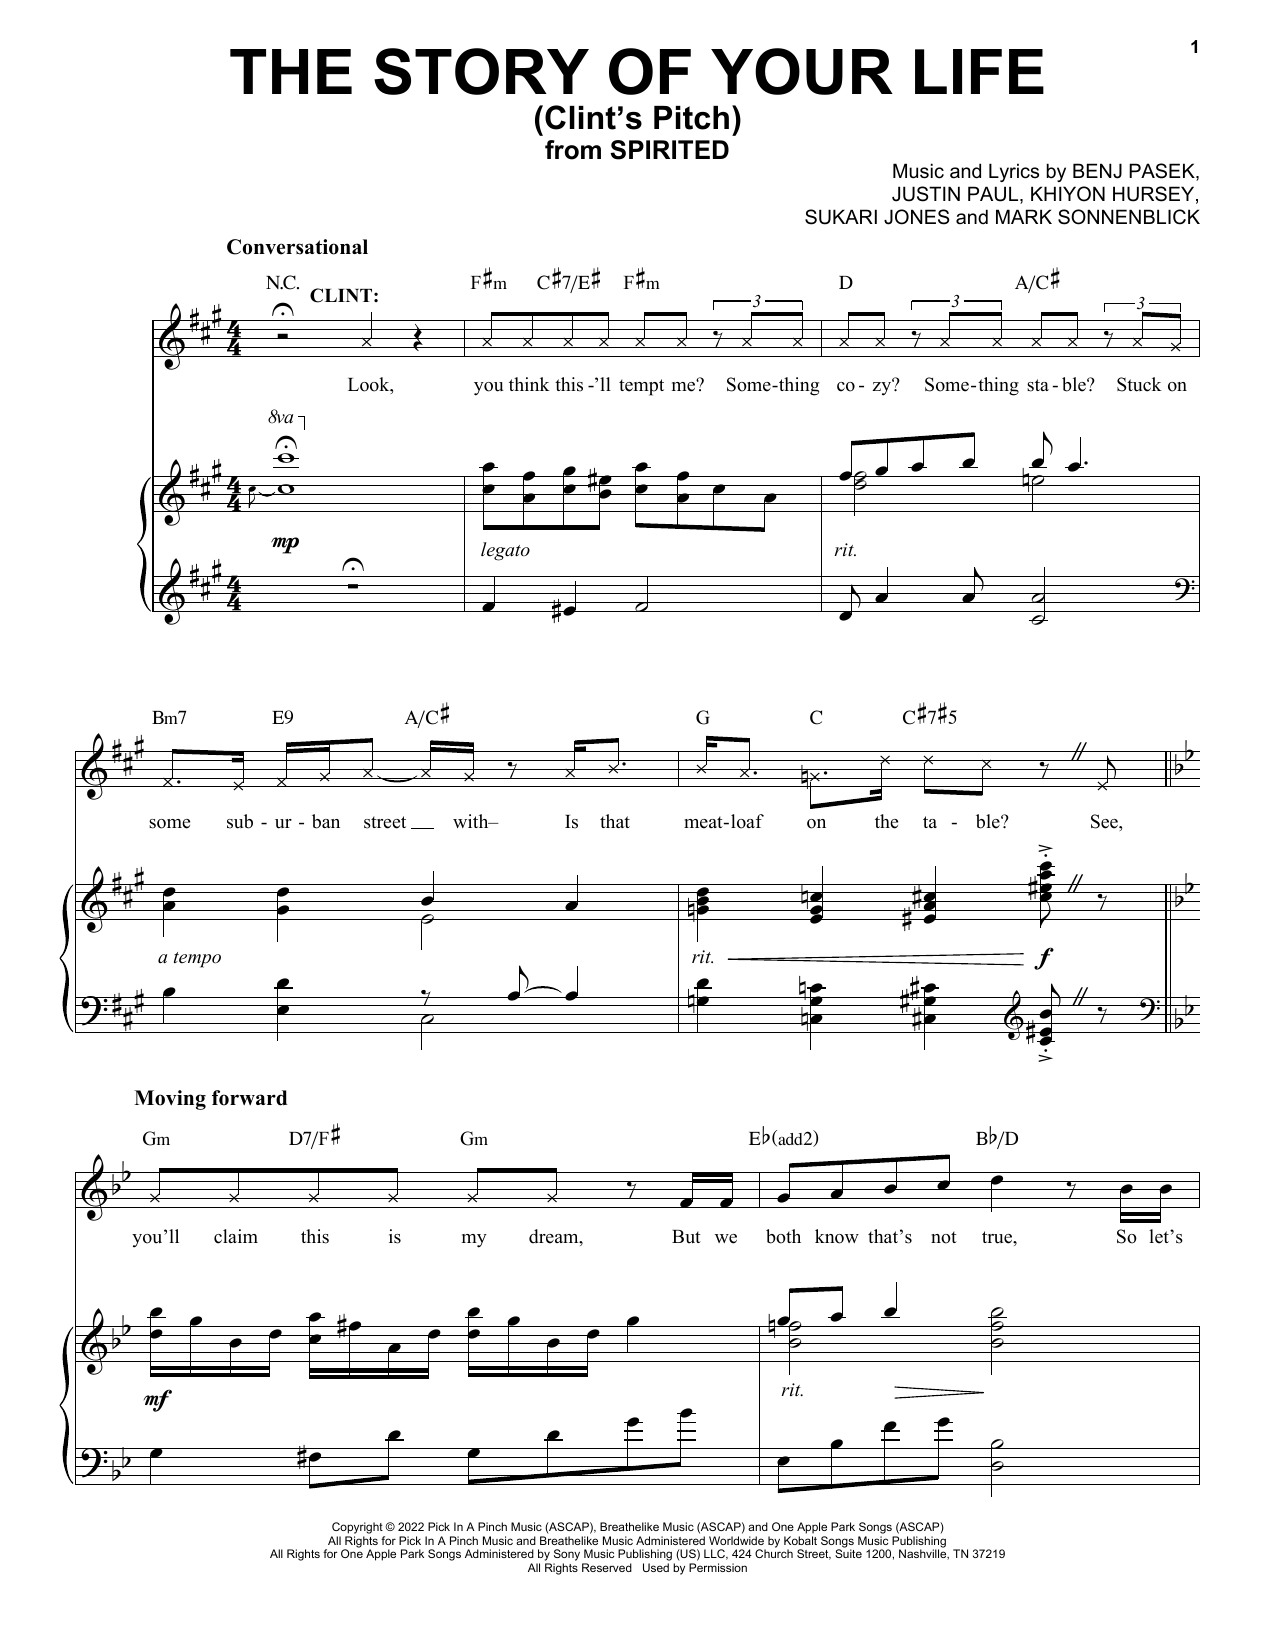 Download Pasek & Paul The Story Of Your Life (Clint's Pitch) Sheet Music